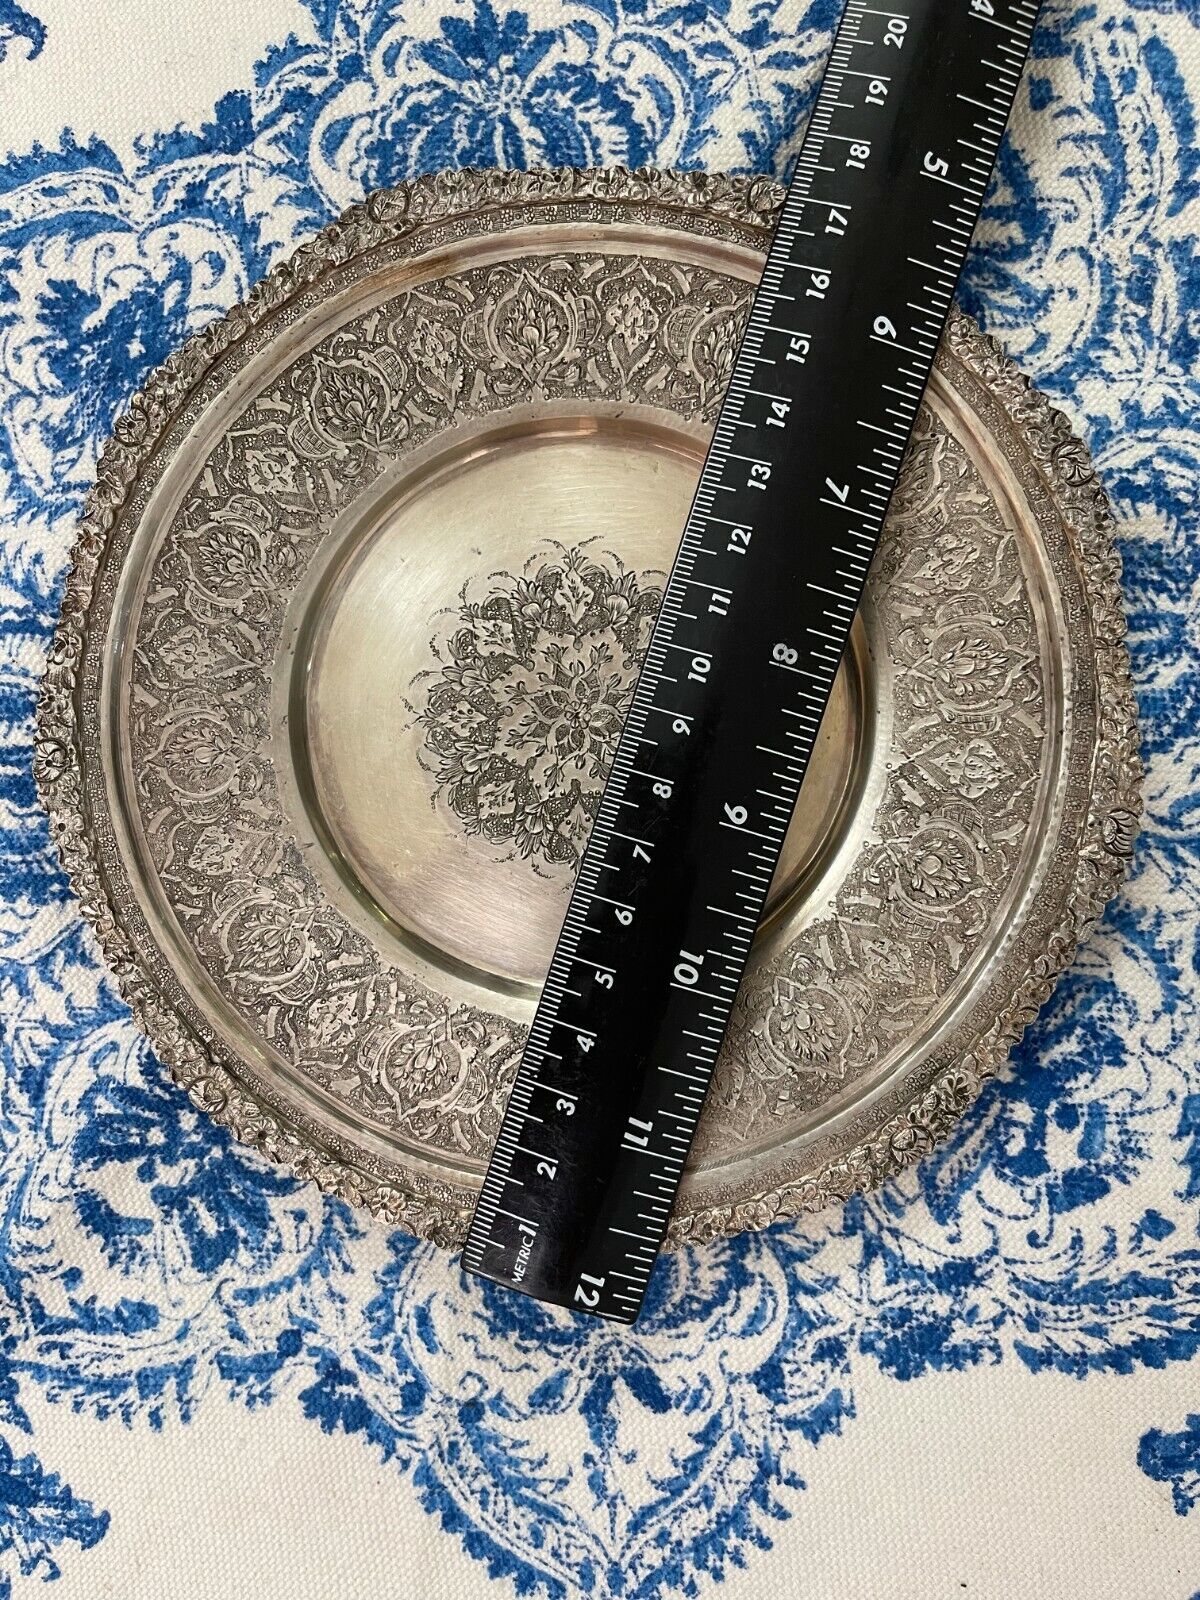 6 Plate Set AUTHENTIC Antique 84 Silver Persian Islamic middle eastern Art  Без бренда - фотография #6